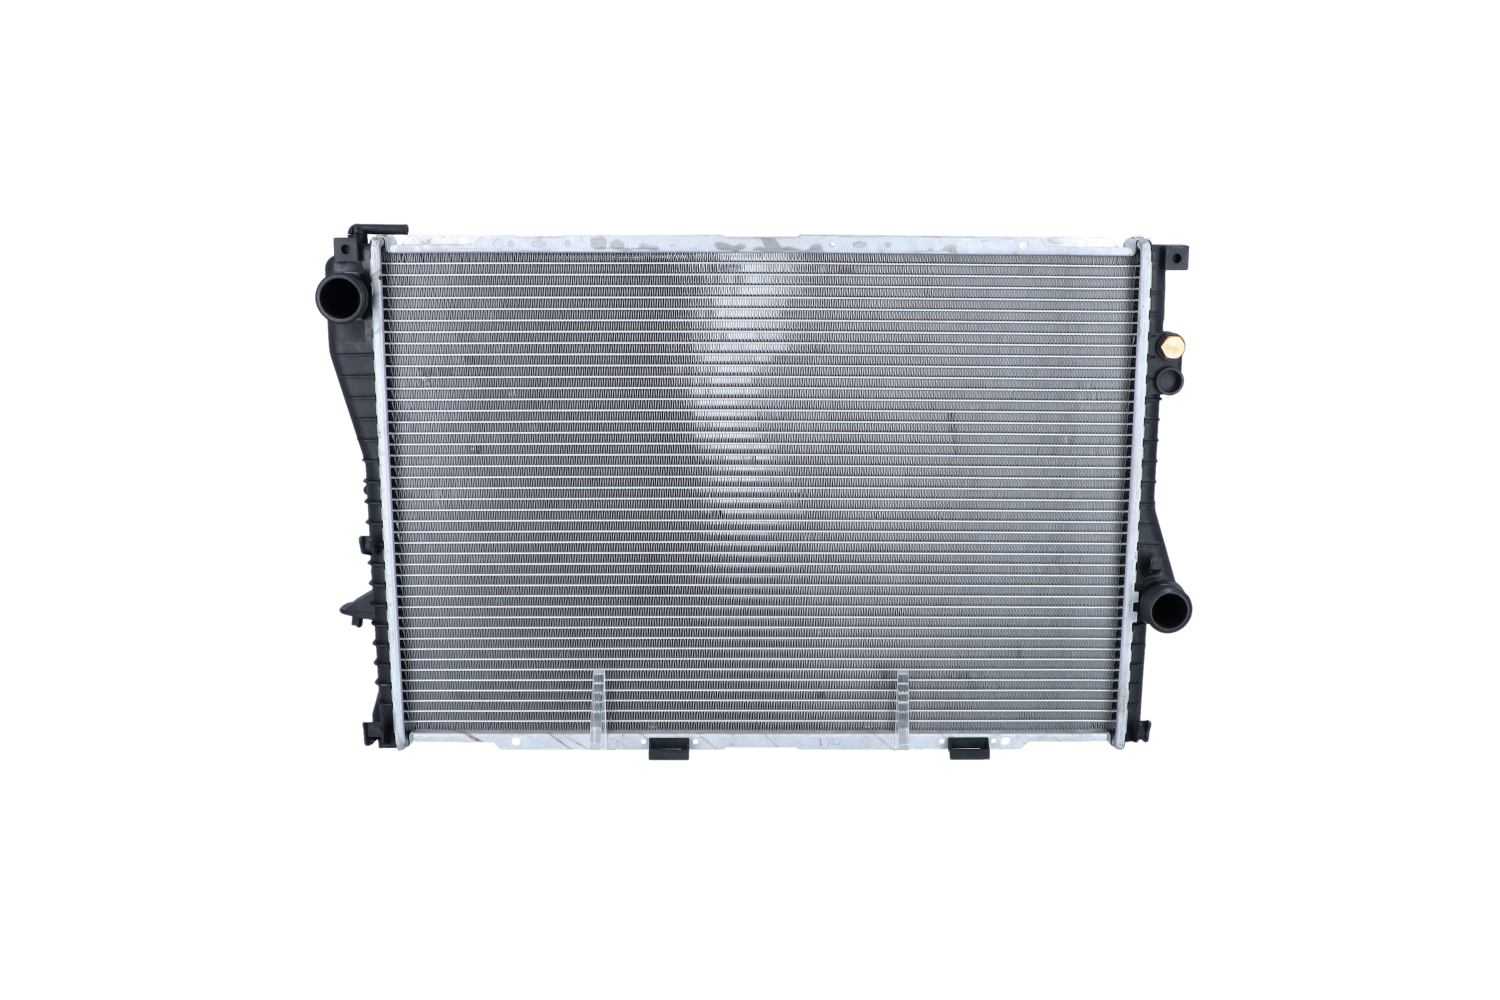 NRF 53722 Engine radiator Aluminium, 650 x 438 x 32 mm, with mounting parts, Brazed cooling fins